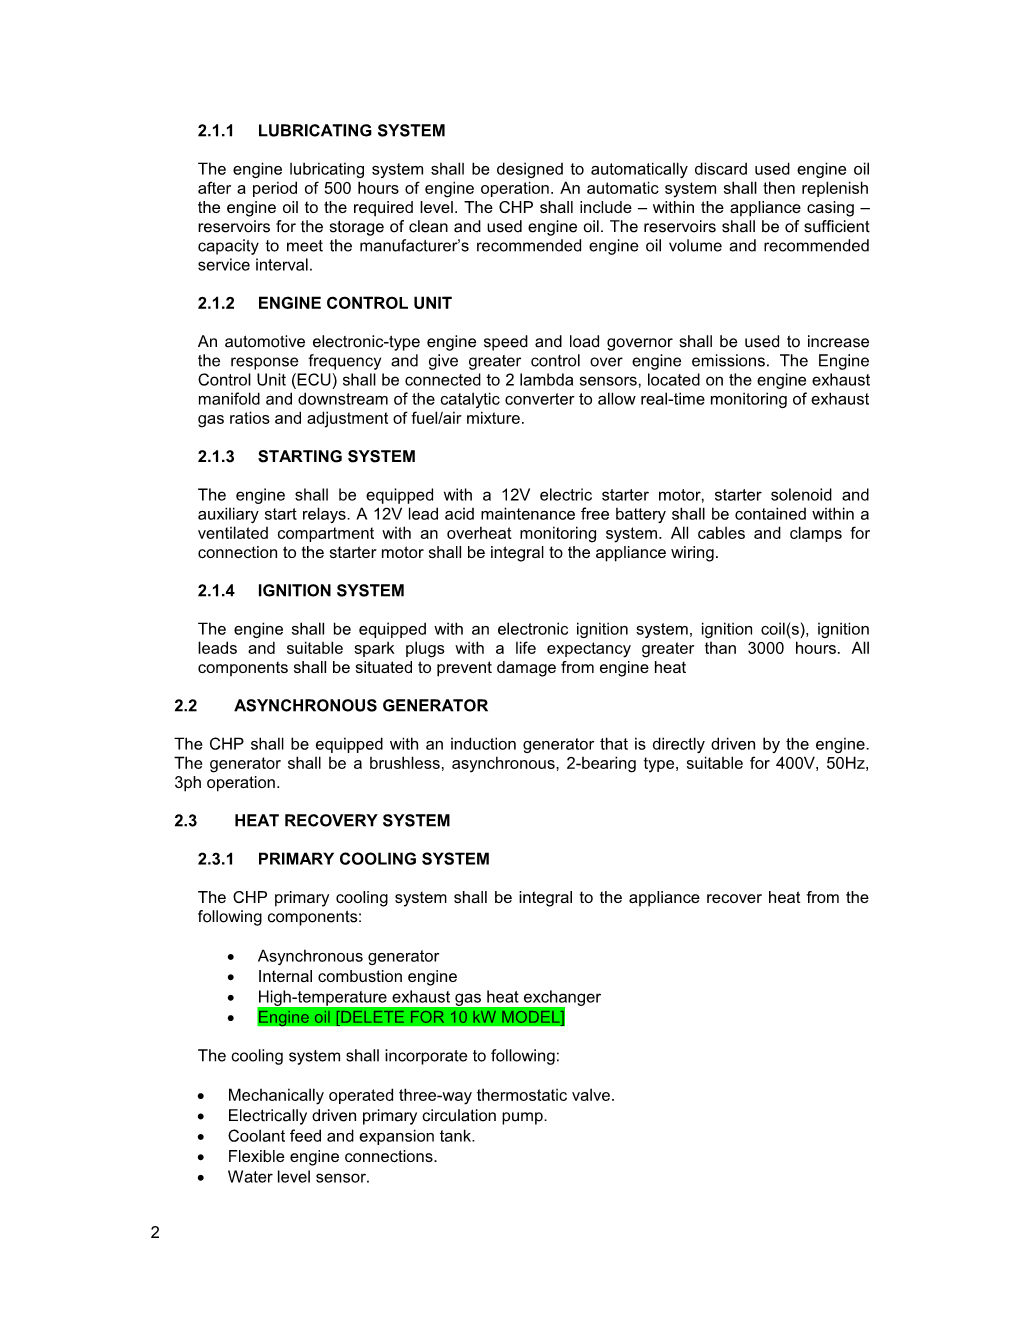 Specification Document (Short) for Adveco Totem Mchp